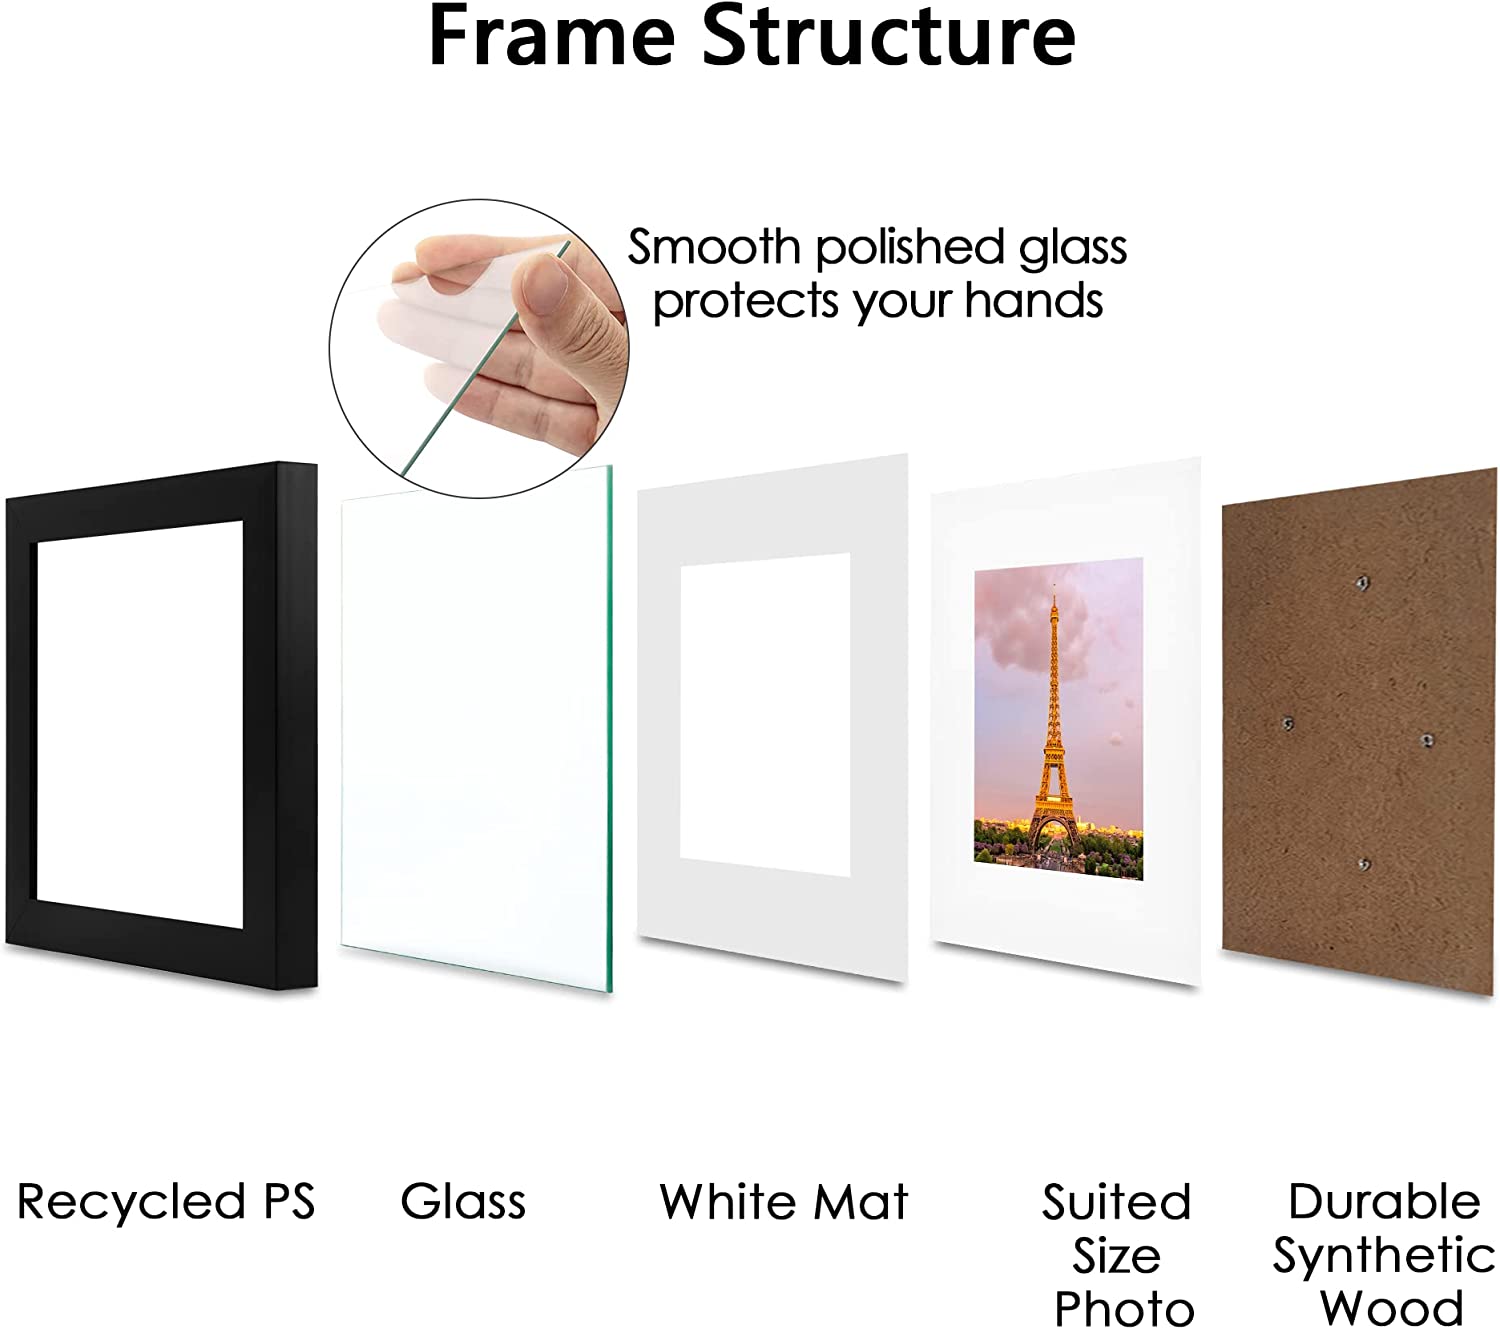 upsimples 6x6 Picture Frame Set of 3, Display Pictures 4x4 with Mat or –  Upsimples Direct